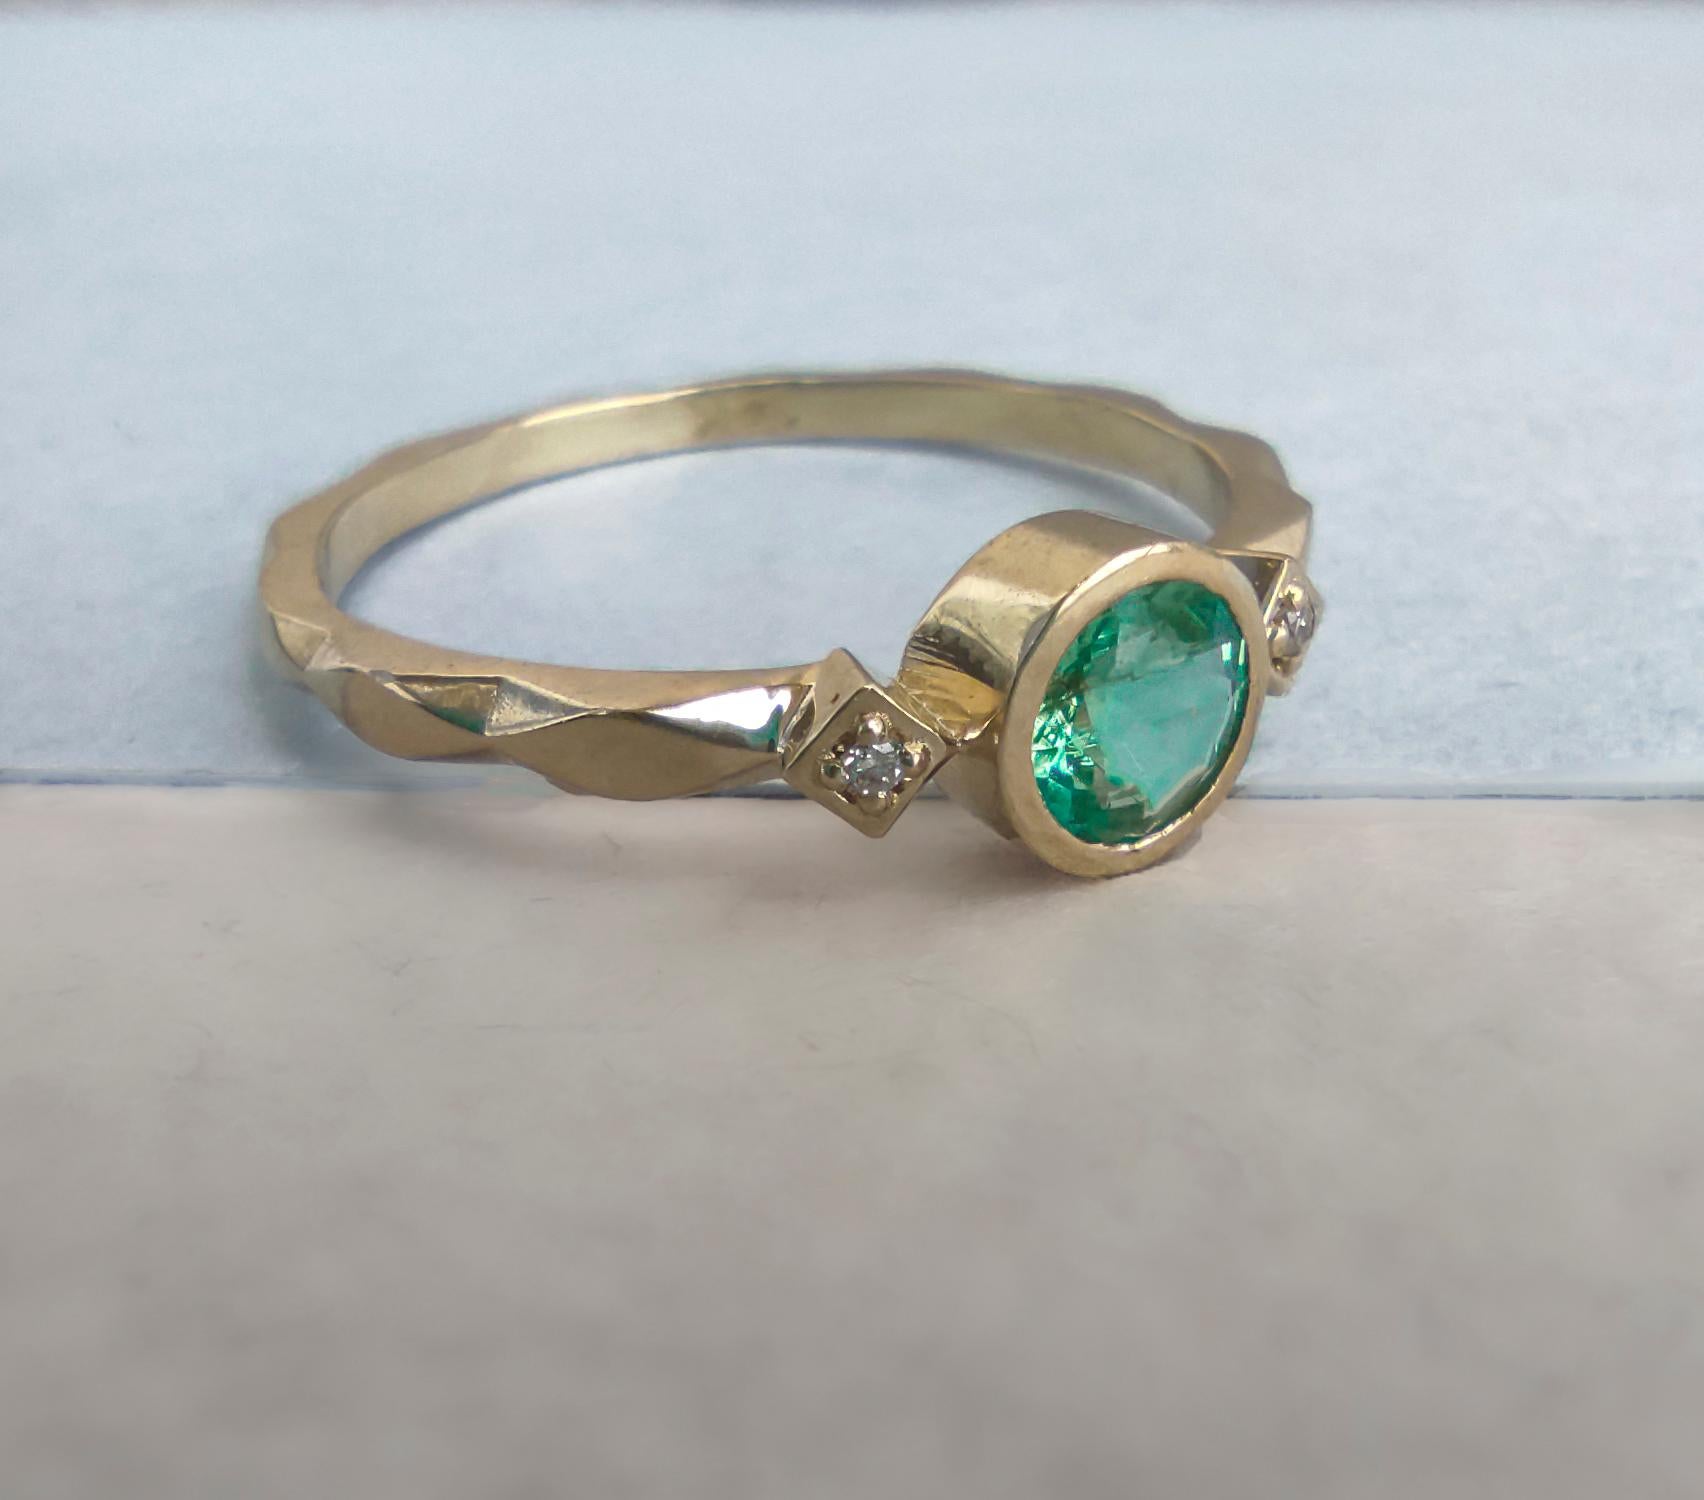 For Sale:  Round Emerald Ring in 14k Gold, Genuine Emerald Ring 5